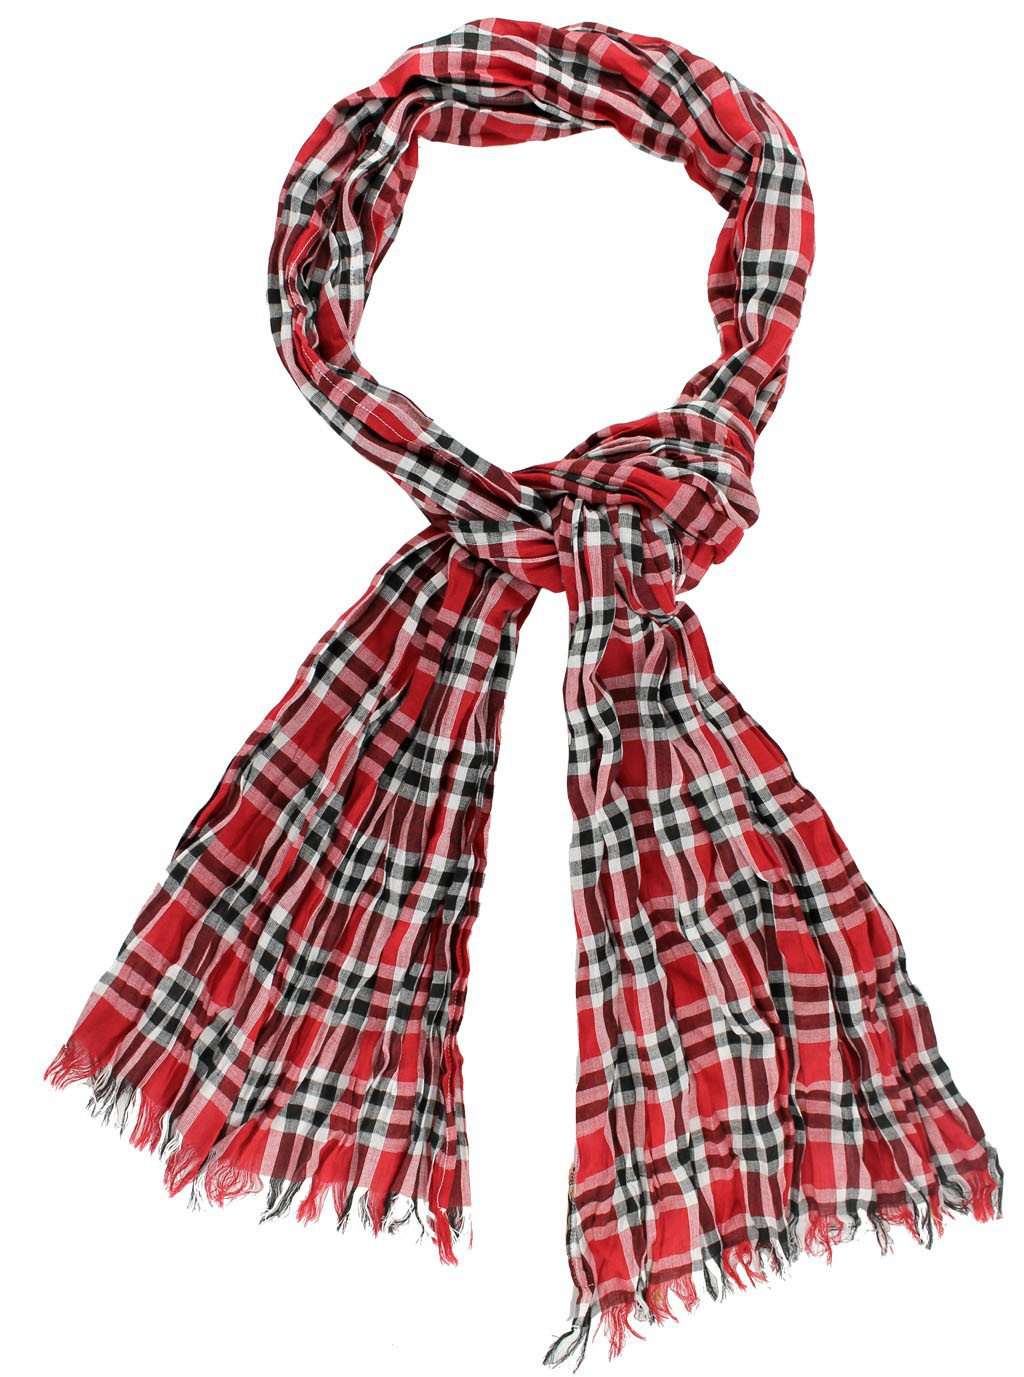 Scarf in Crimson and Black Madras by Olde School Brand - Country Club Prep